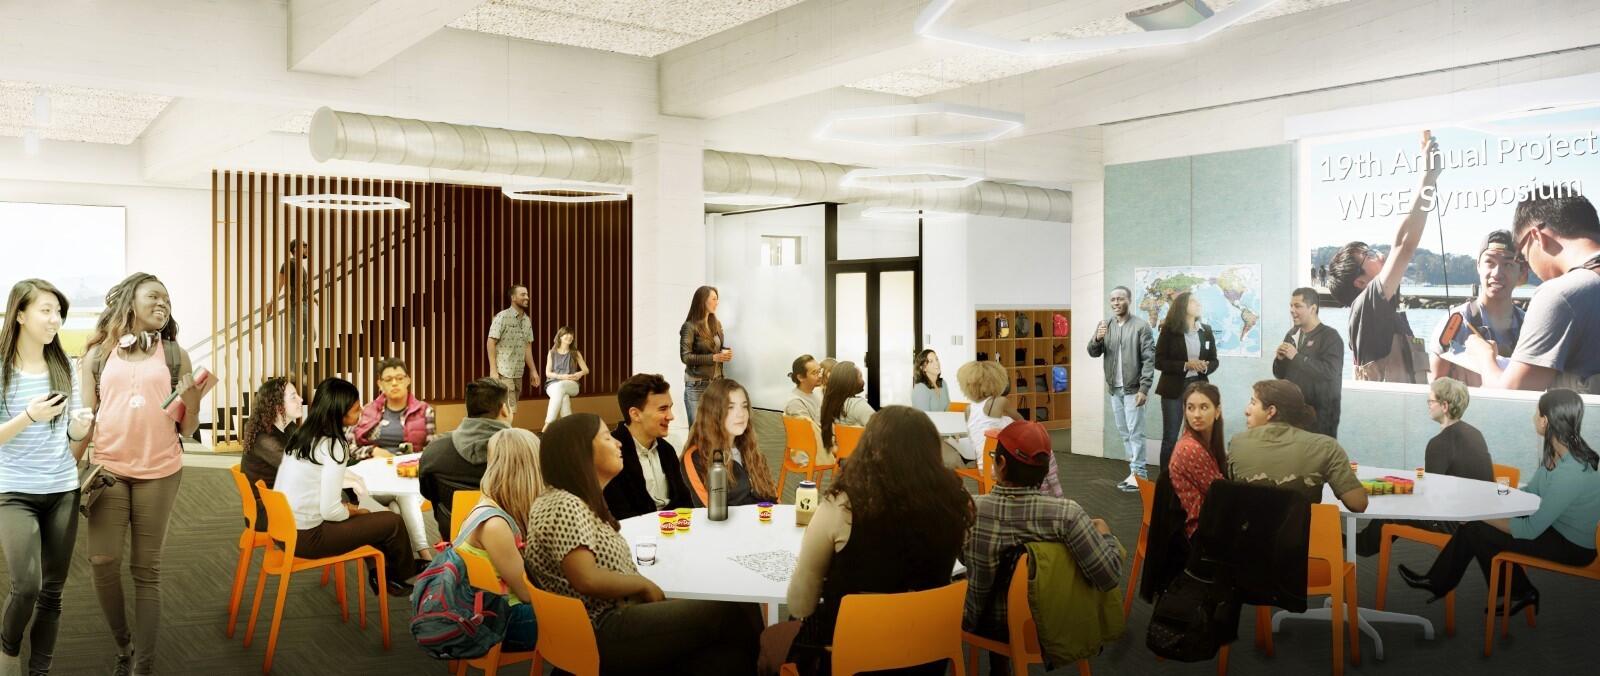 Rendering of the renovated Crissy Field Center interior youth space at Presidio Tunnel Tops